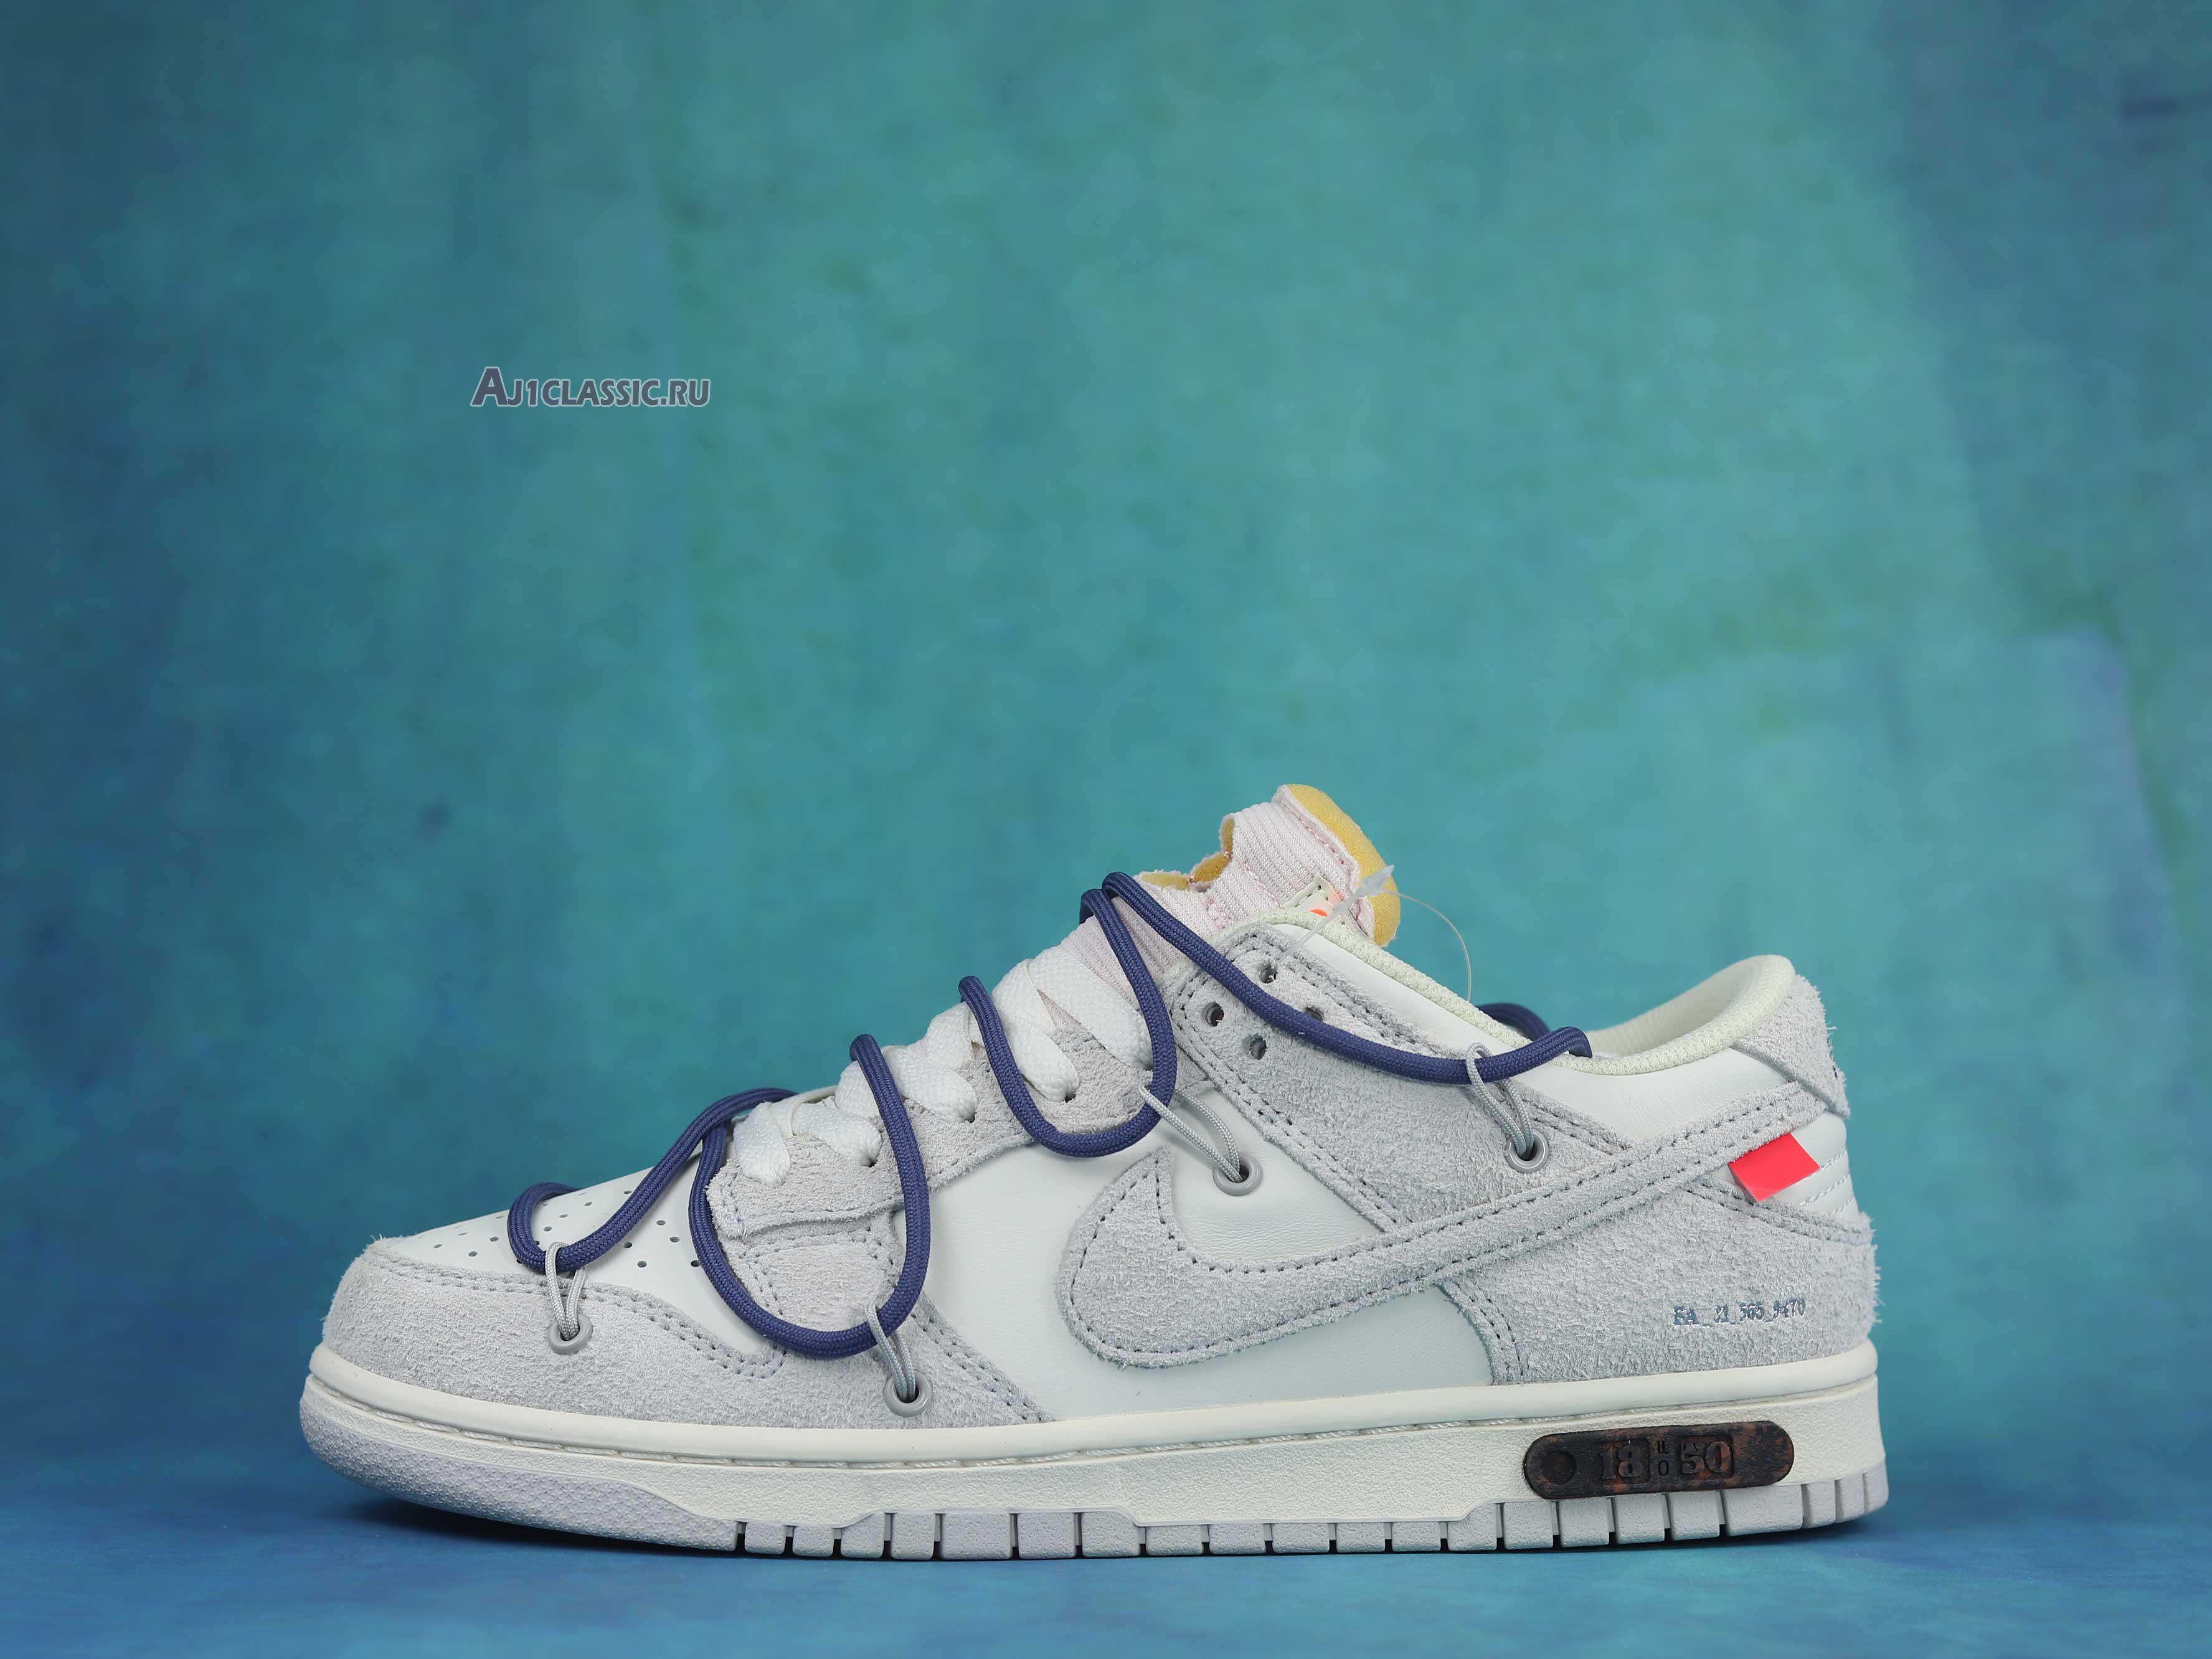 Off-White x Nike Dunk Low "Lot 18 of 50" DJ0950-112